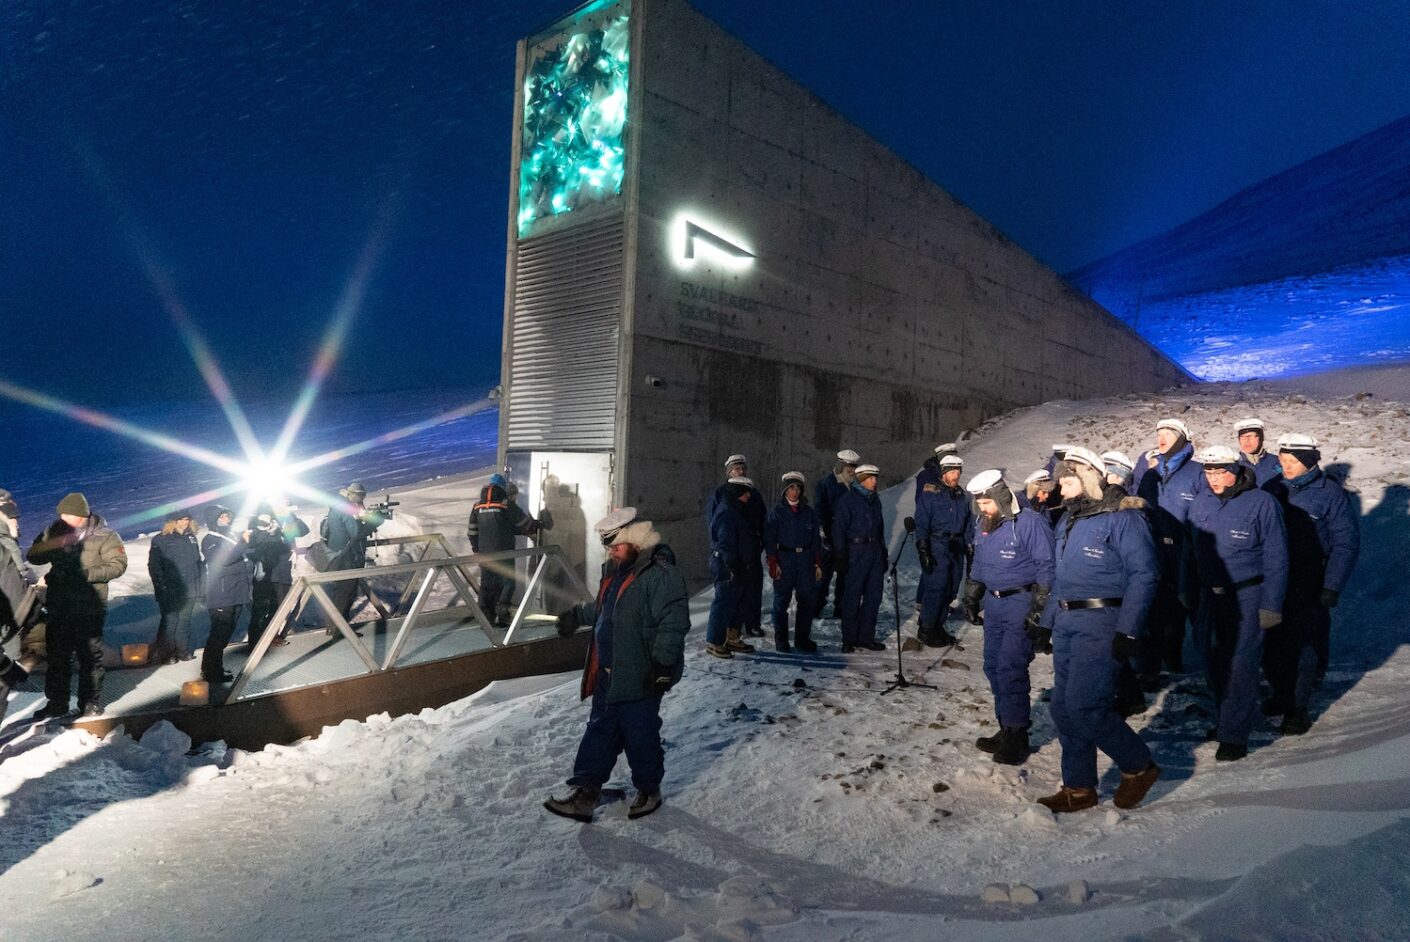 International Biodiversity Day: How the Svalbard Seed Vault defends